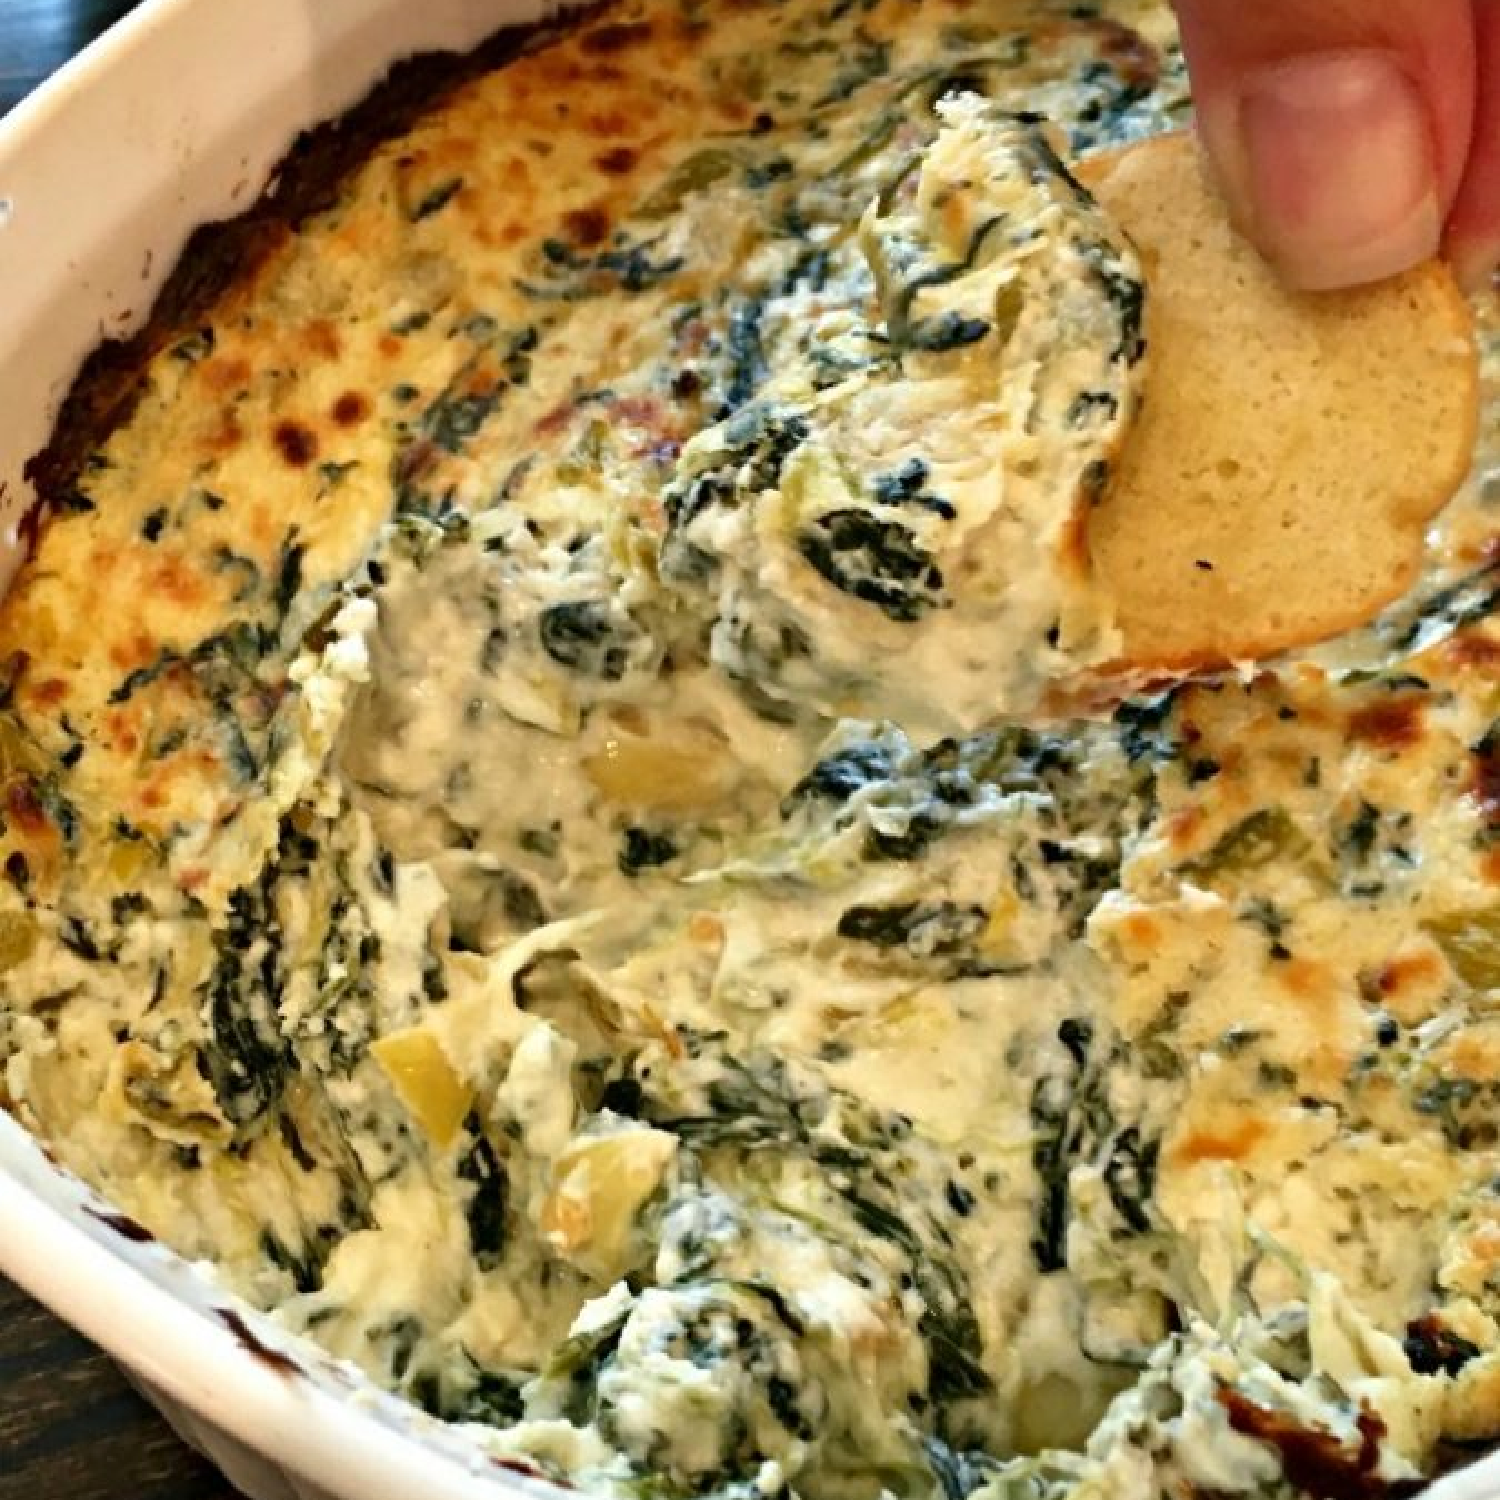 This photo shows a spinach artichoke dip after baking.